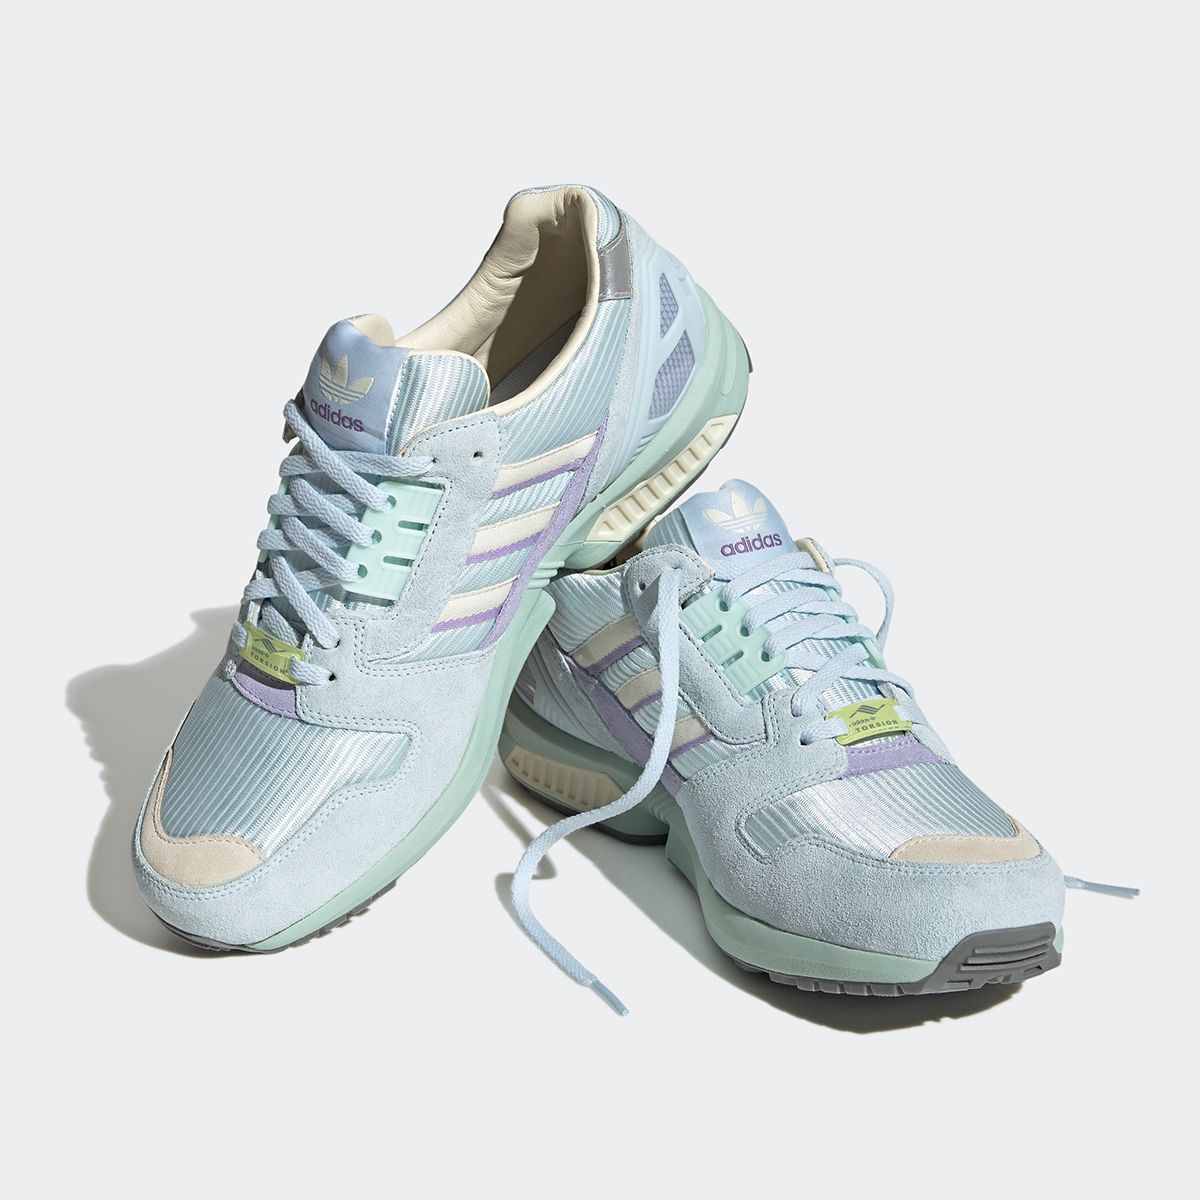 The adidas ZX 8000 “Sky Tint” Surfaces for Spring | House of Heat°